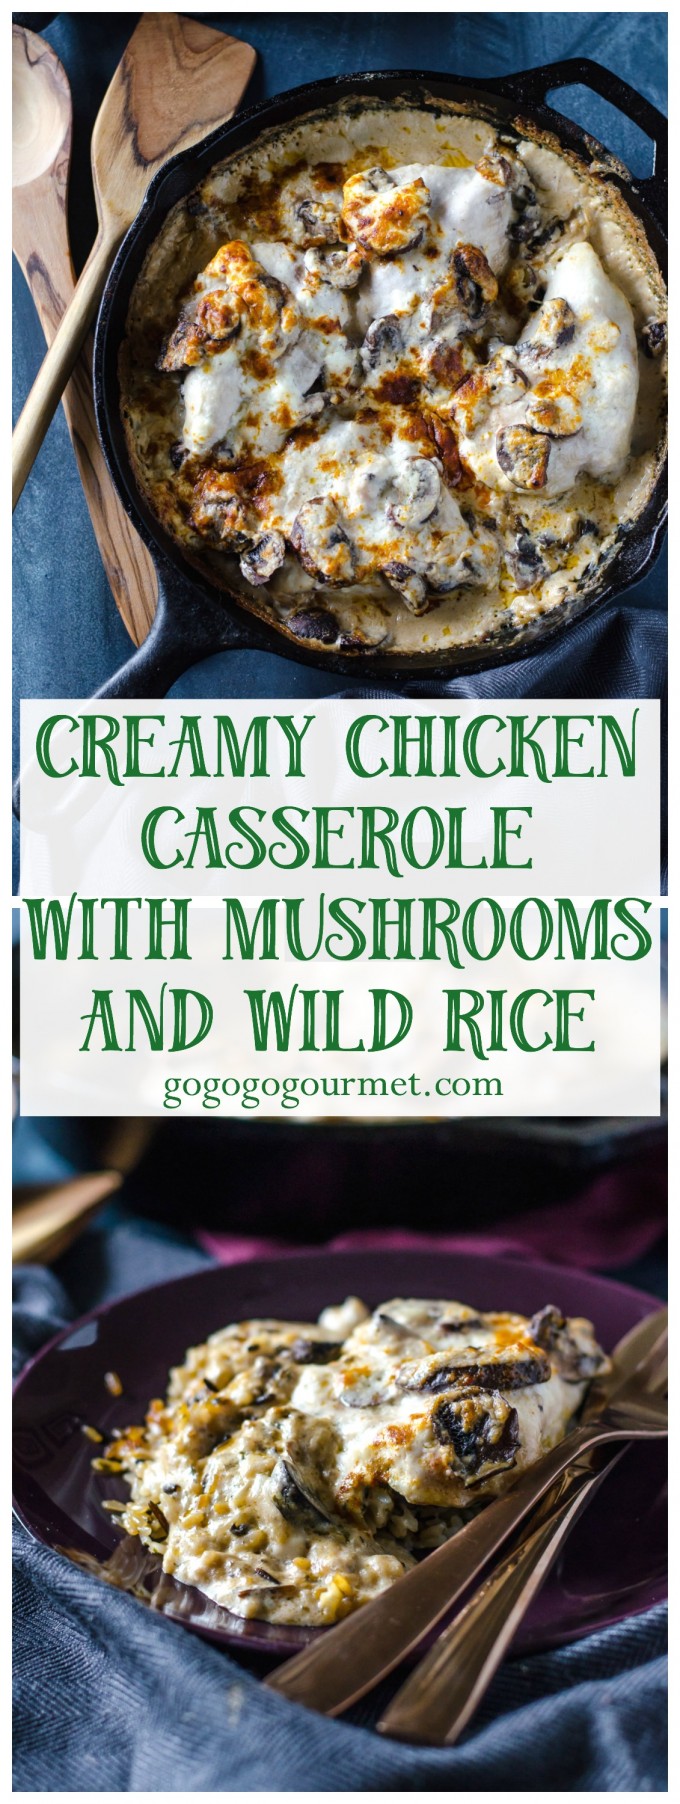 A one-pot dinner option for those busy nights! Creamy Chicken Casserole with Mushrooms and Wild Rice @gogogogourmet via @gogogogourmet